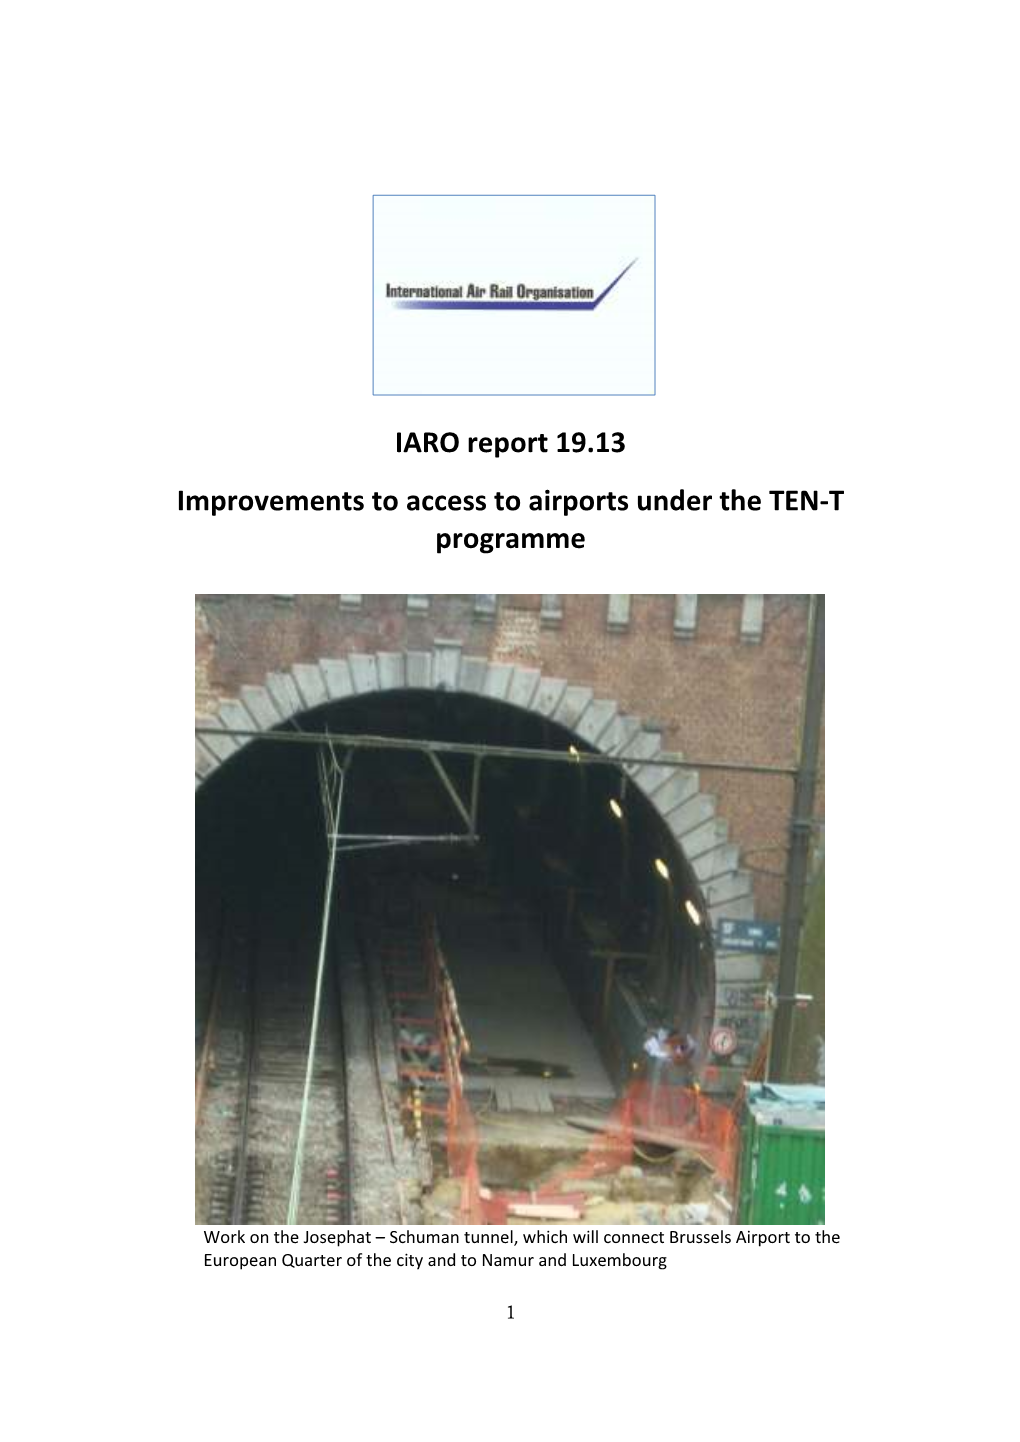 IARO Report 19.13 Improvements to Access to Airports Under the TEN-T Programme